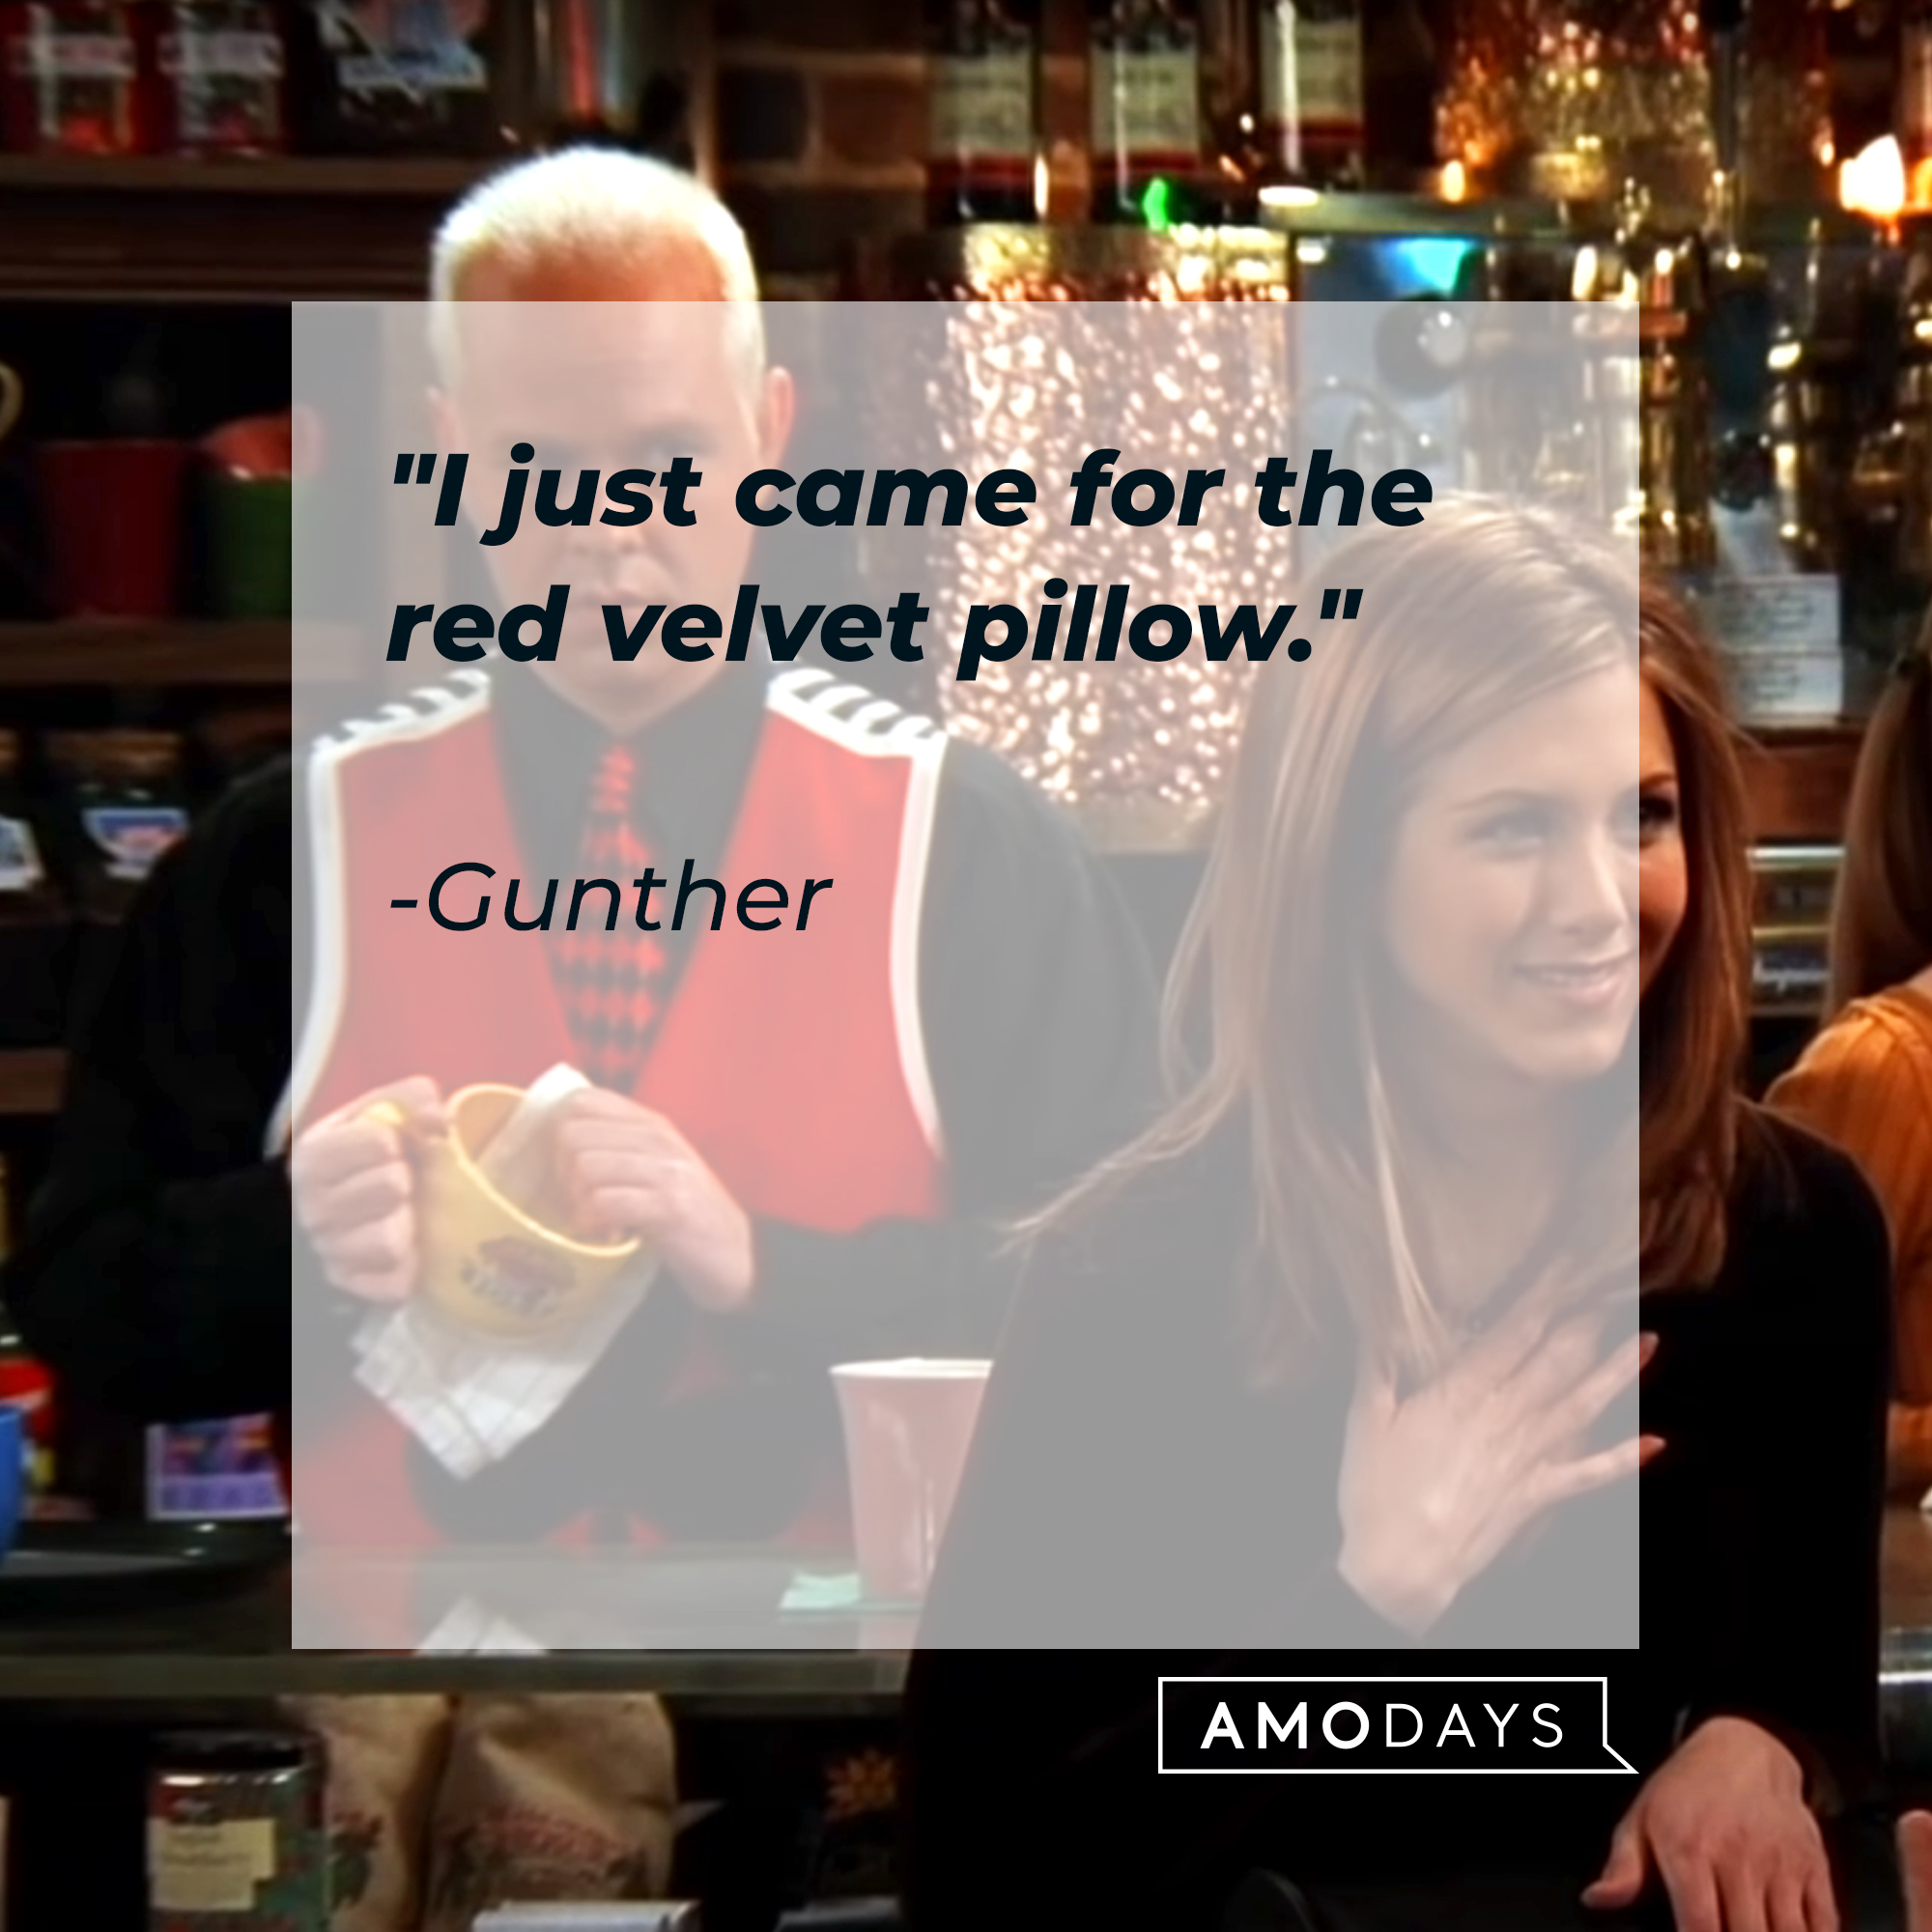 An image of Gunther and Rachel, with his quote: “I just came for the red velvet pillow.” | Source: Youtube.com/Friends